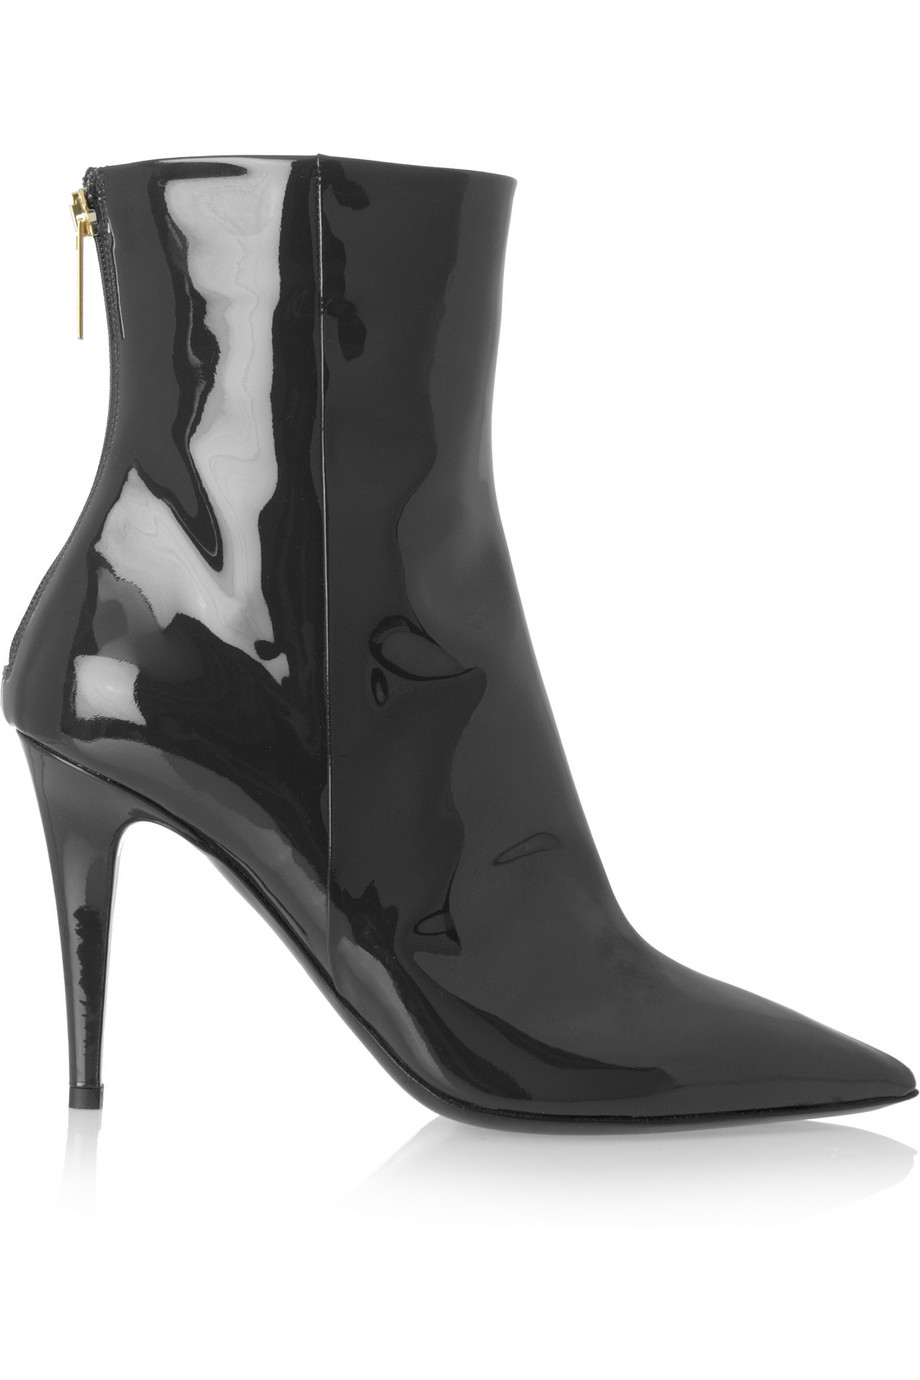 Lyst - Tamara Mellon Excess Patent-Leather Ankle Boots in Gray